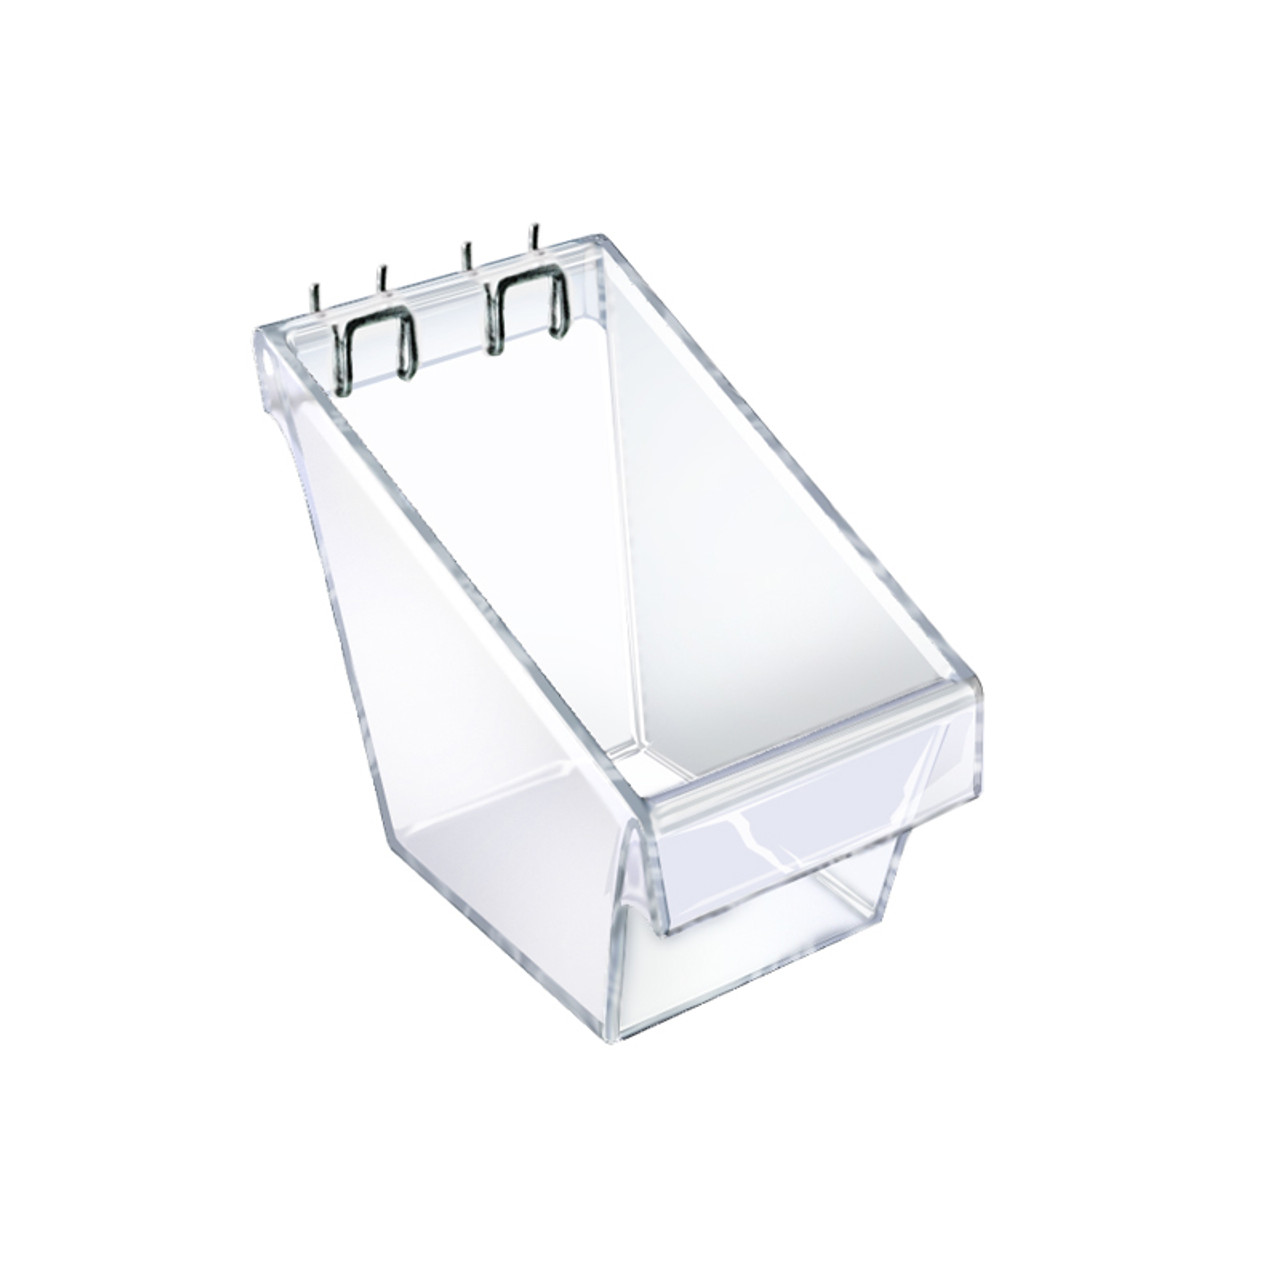 Mini Clear Plastic Molded Bucket, Storage Container Bin for Pegboard,  Slatwall, or Counter with 2 Metal U-Hooks, Size: 4 W x 6.875 D x 5.87H,  4-Pack - Azar Displays